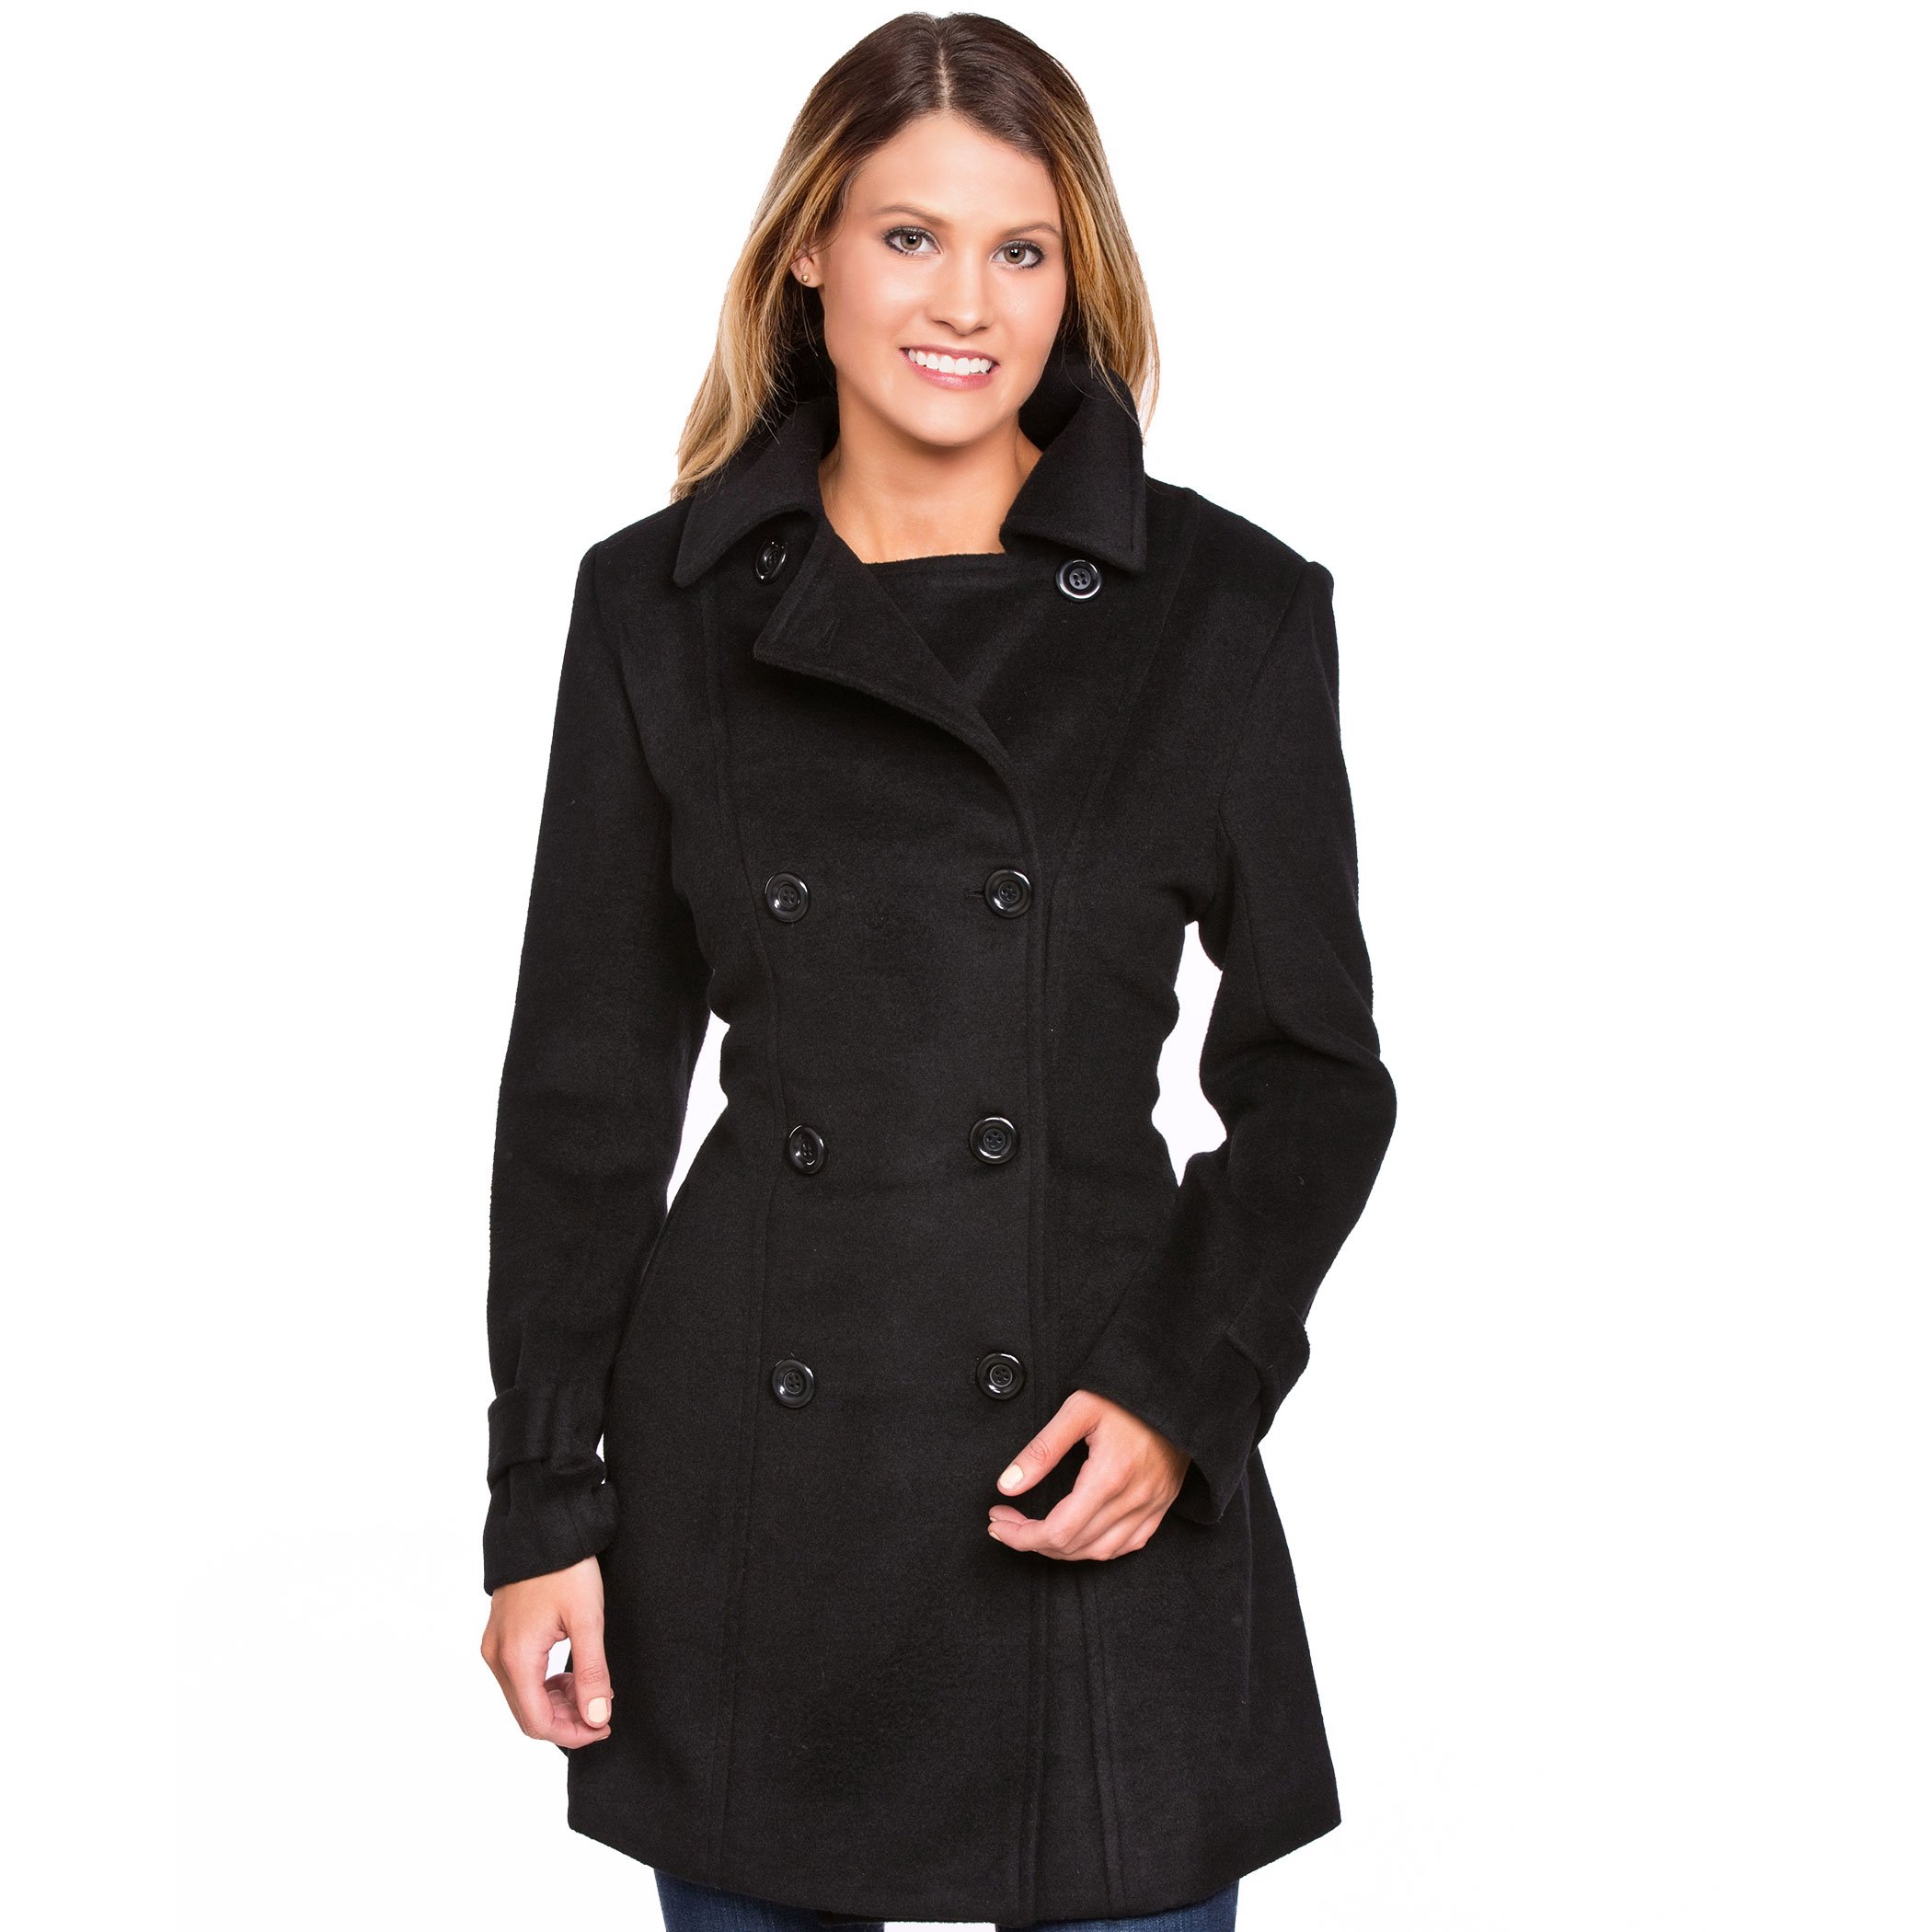 Black Wool Blend Double Breasted Pea Coat for Women